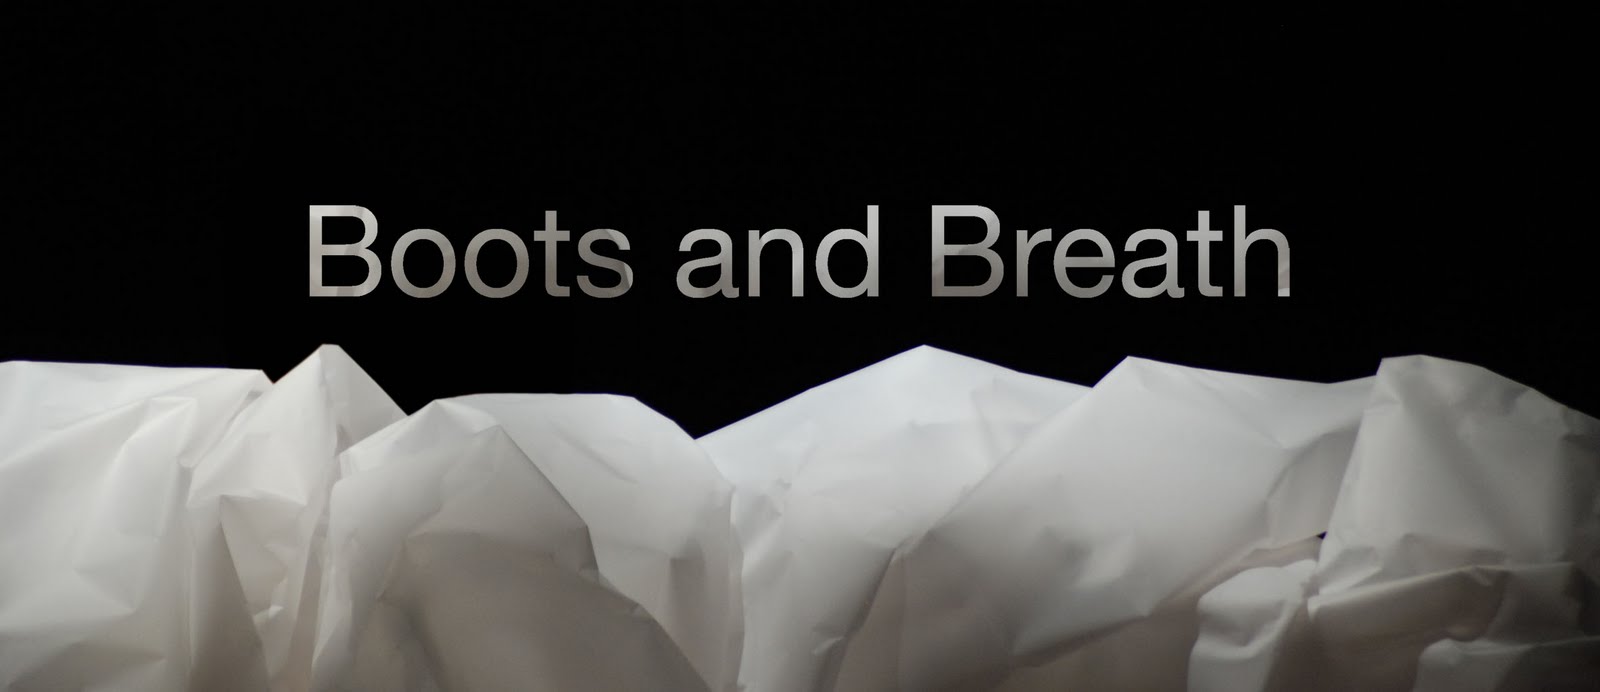 Boots and Breath